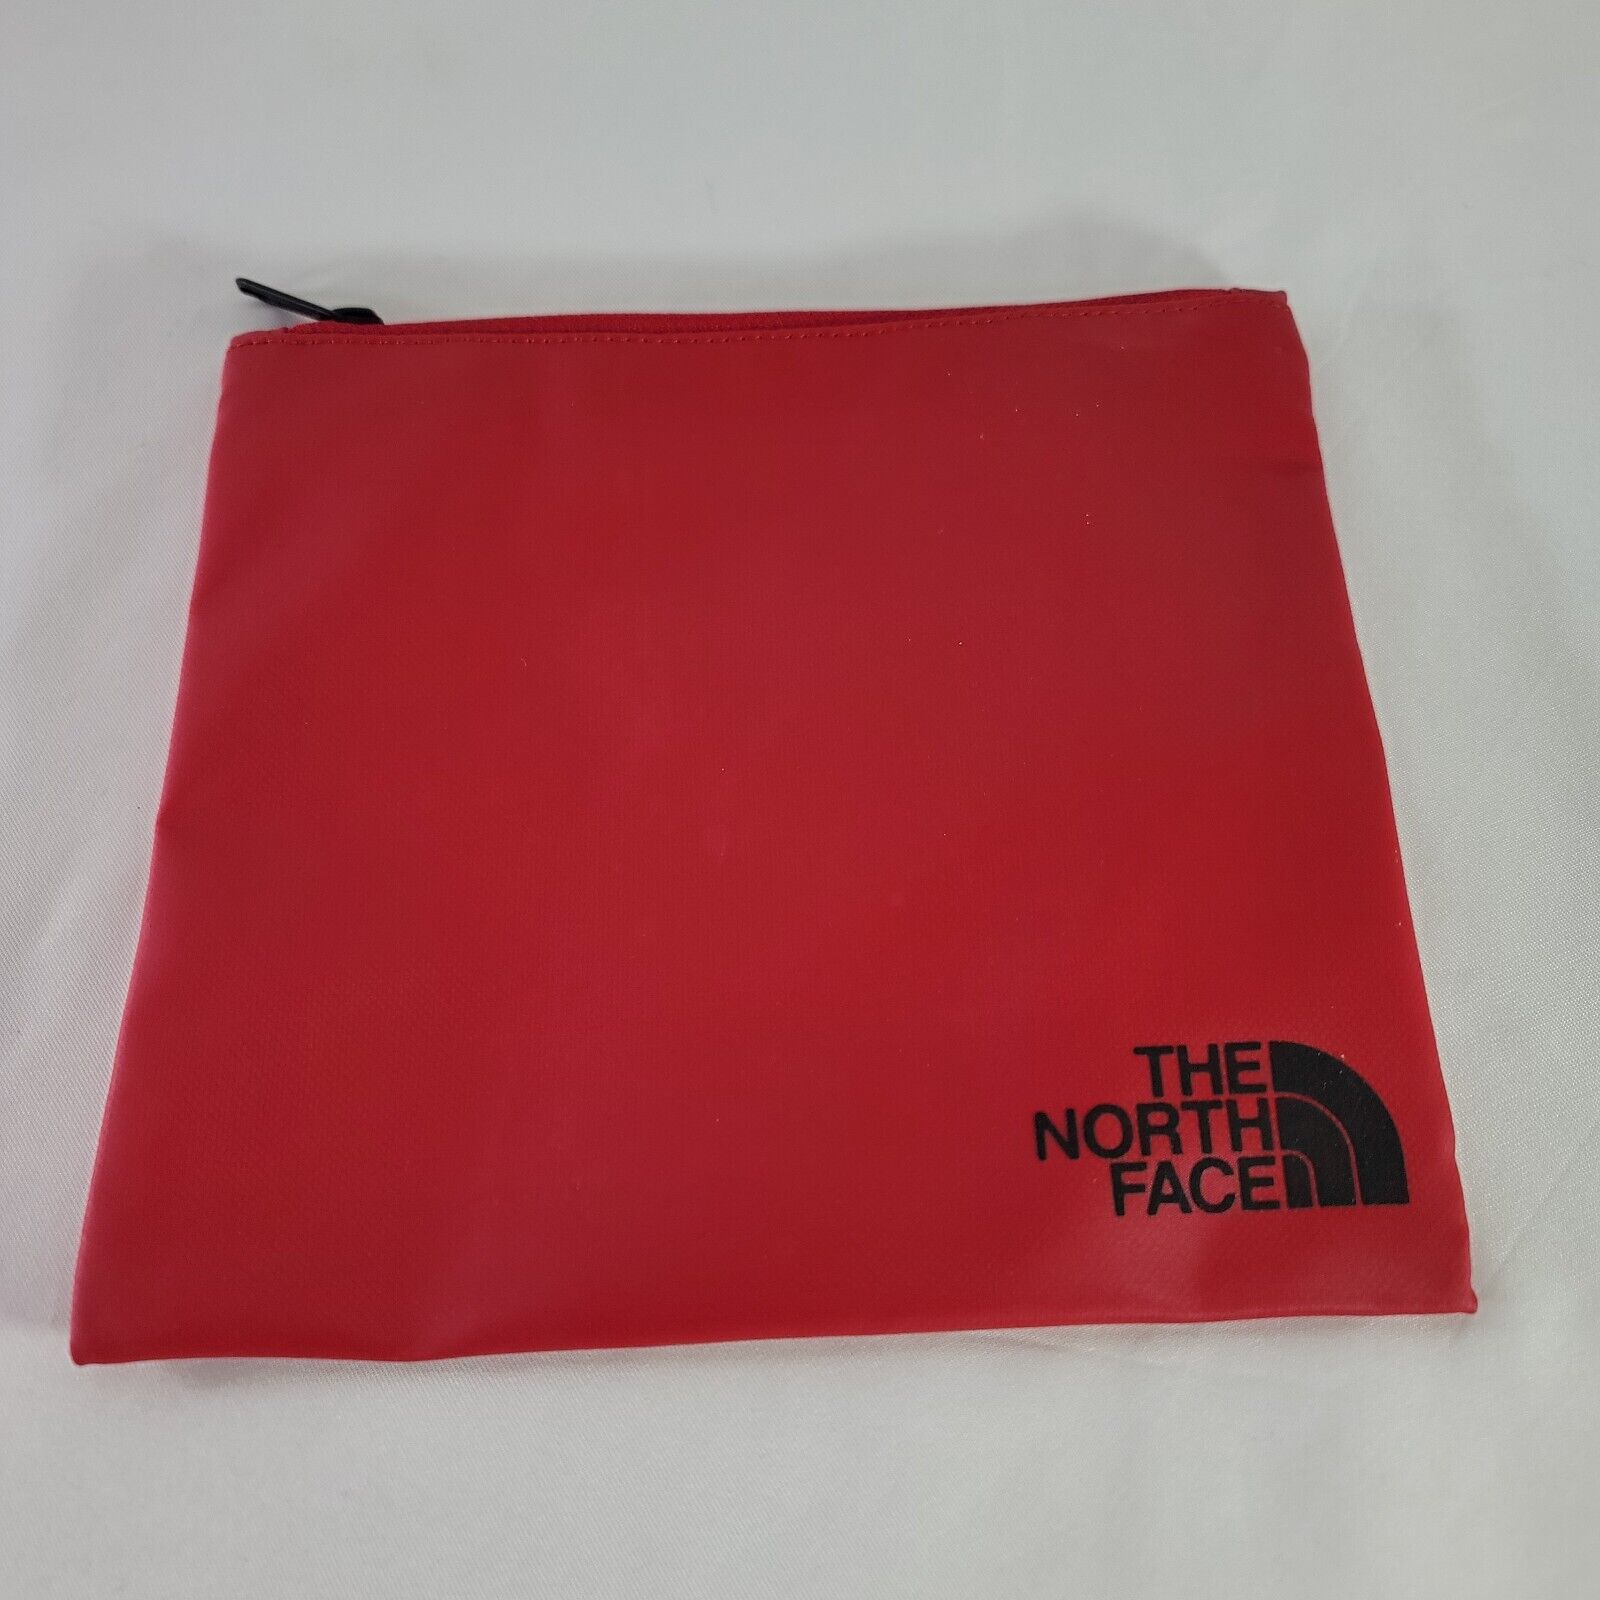 The North Face - Red Travel Compact Zipper Bag 8x… - image 4